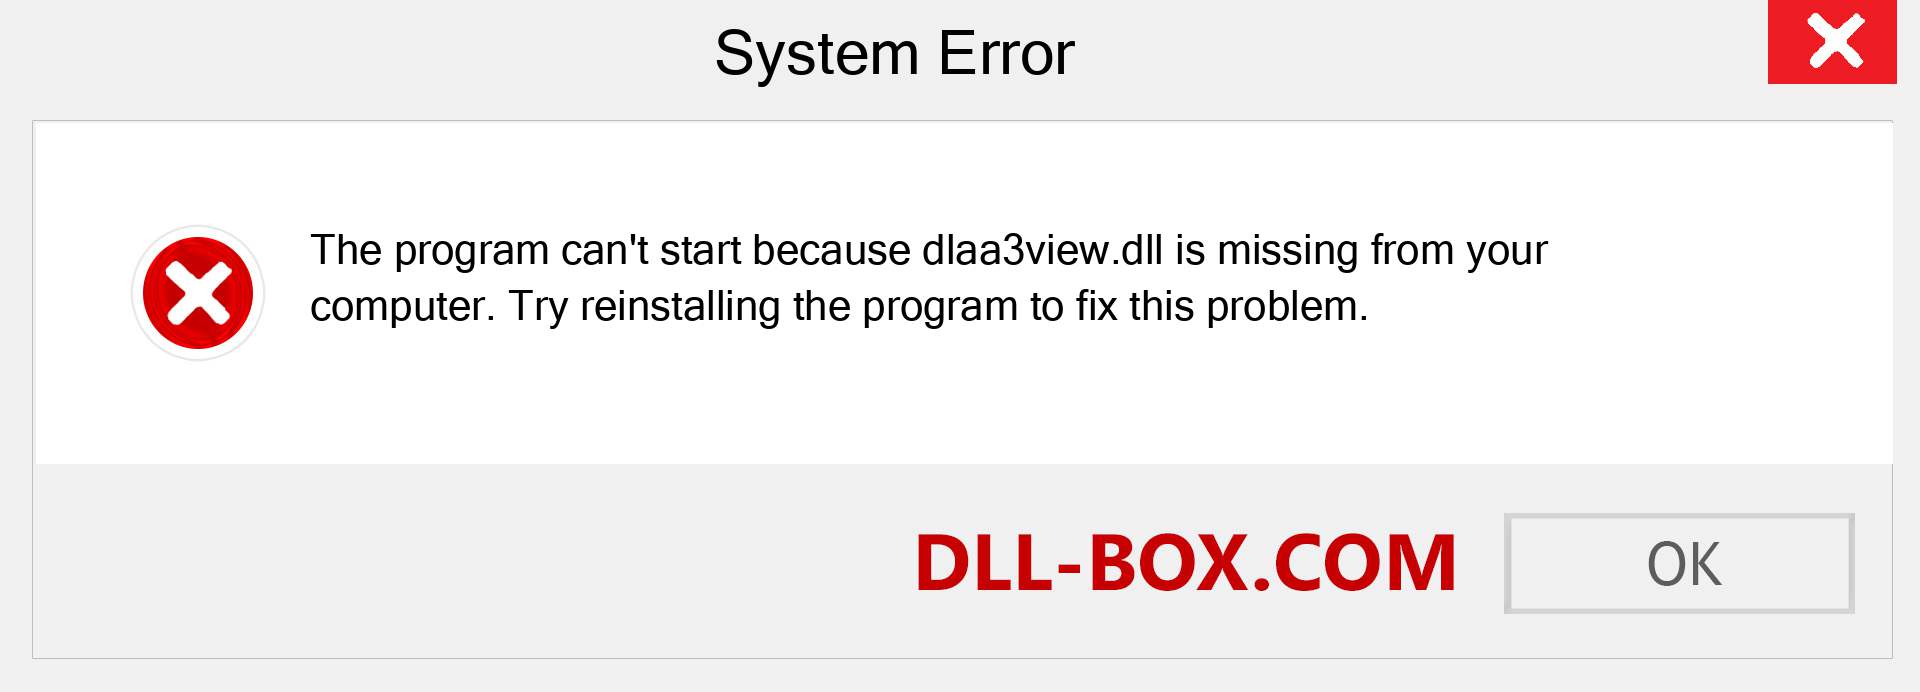  dlaa3view.dll file is missing?. Download for Windows 7, 8, 10 - Fix  dlaa3view dll Missing Error on Windows, photos, images